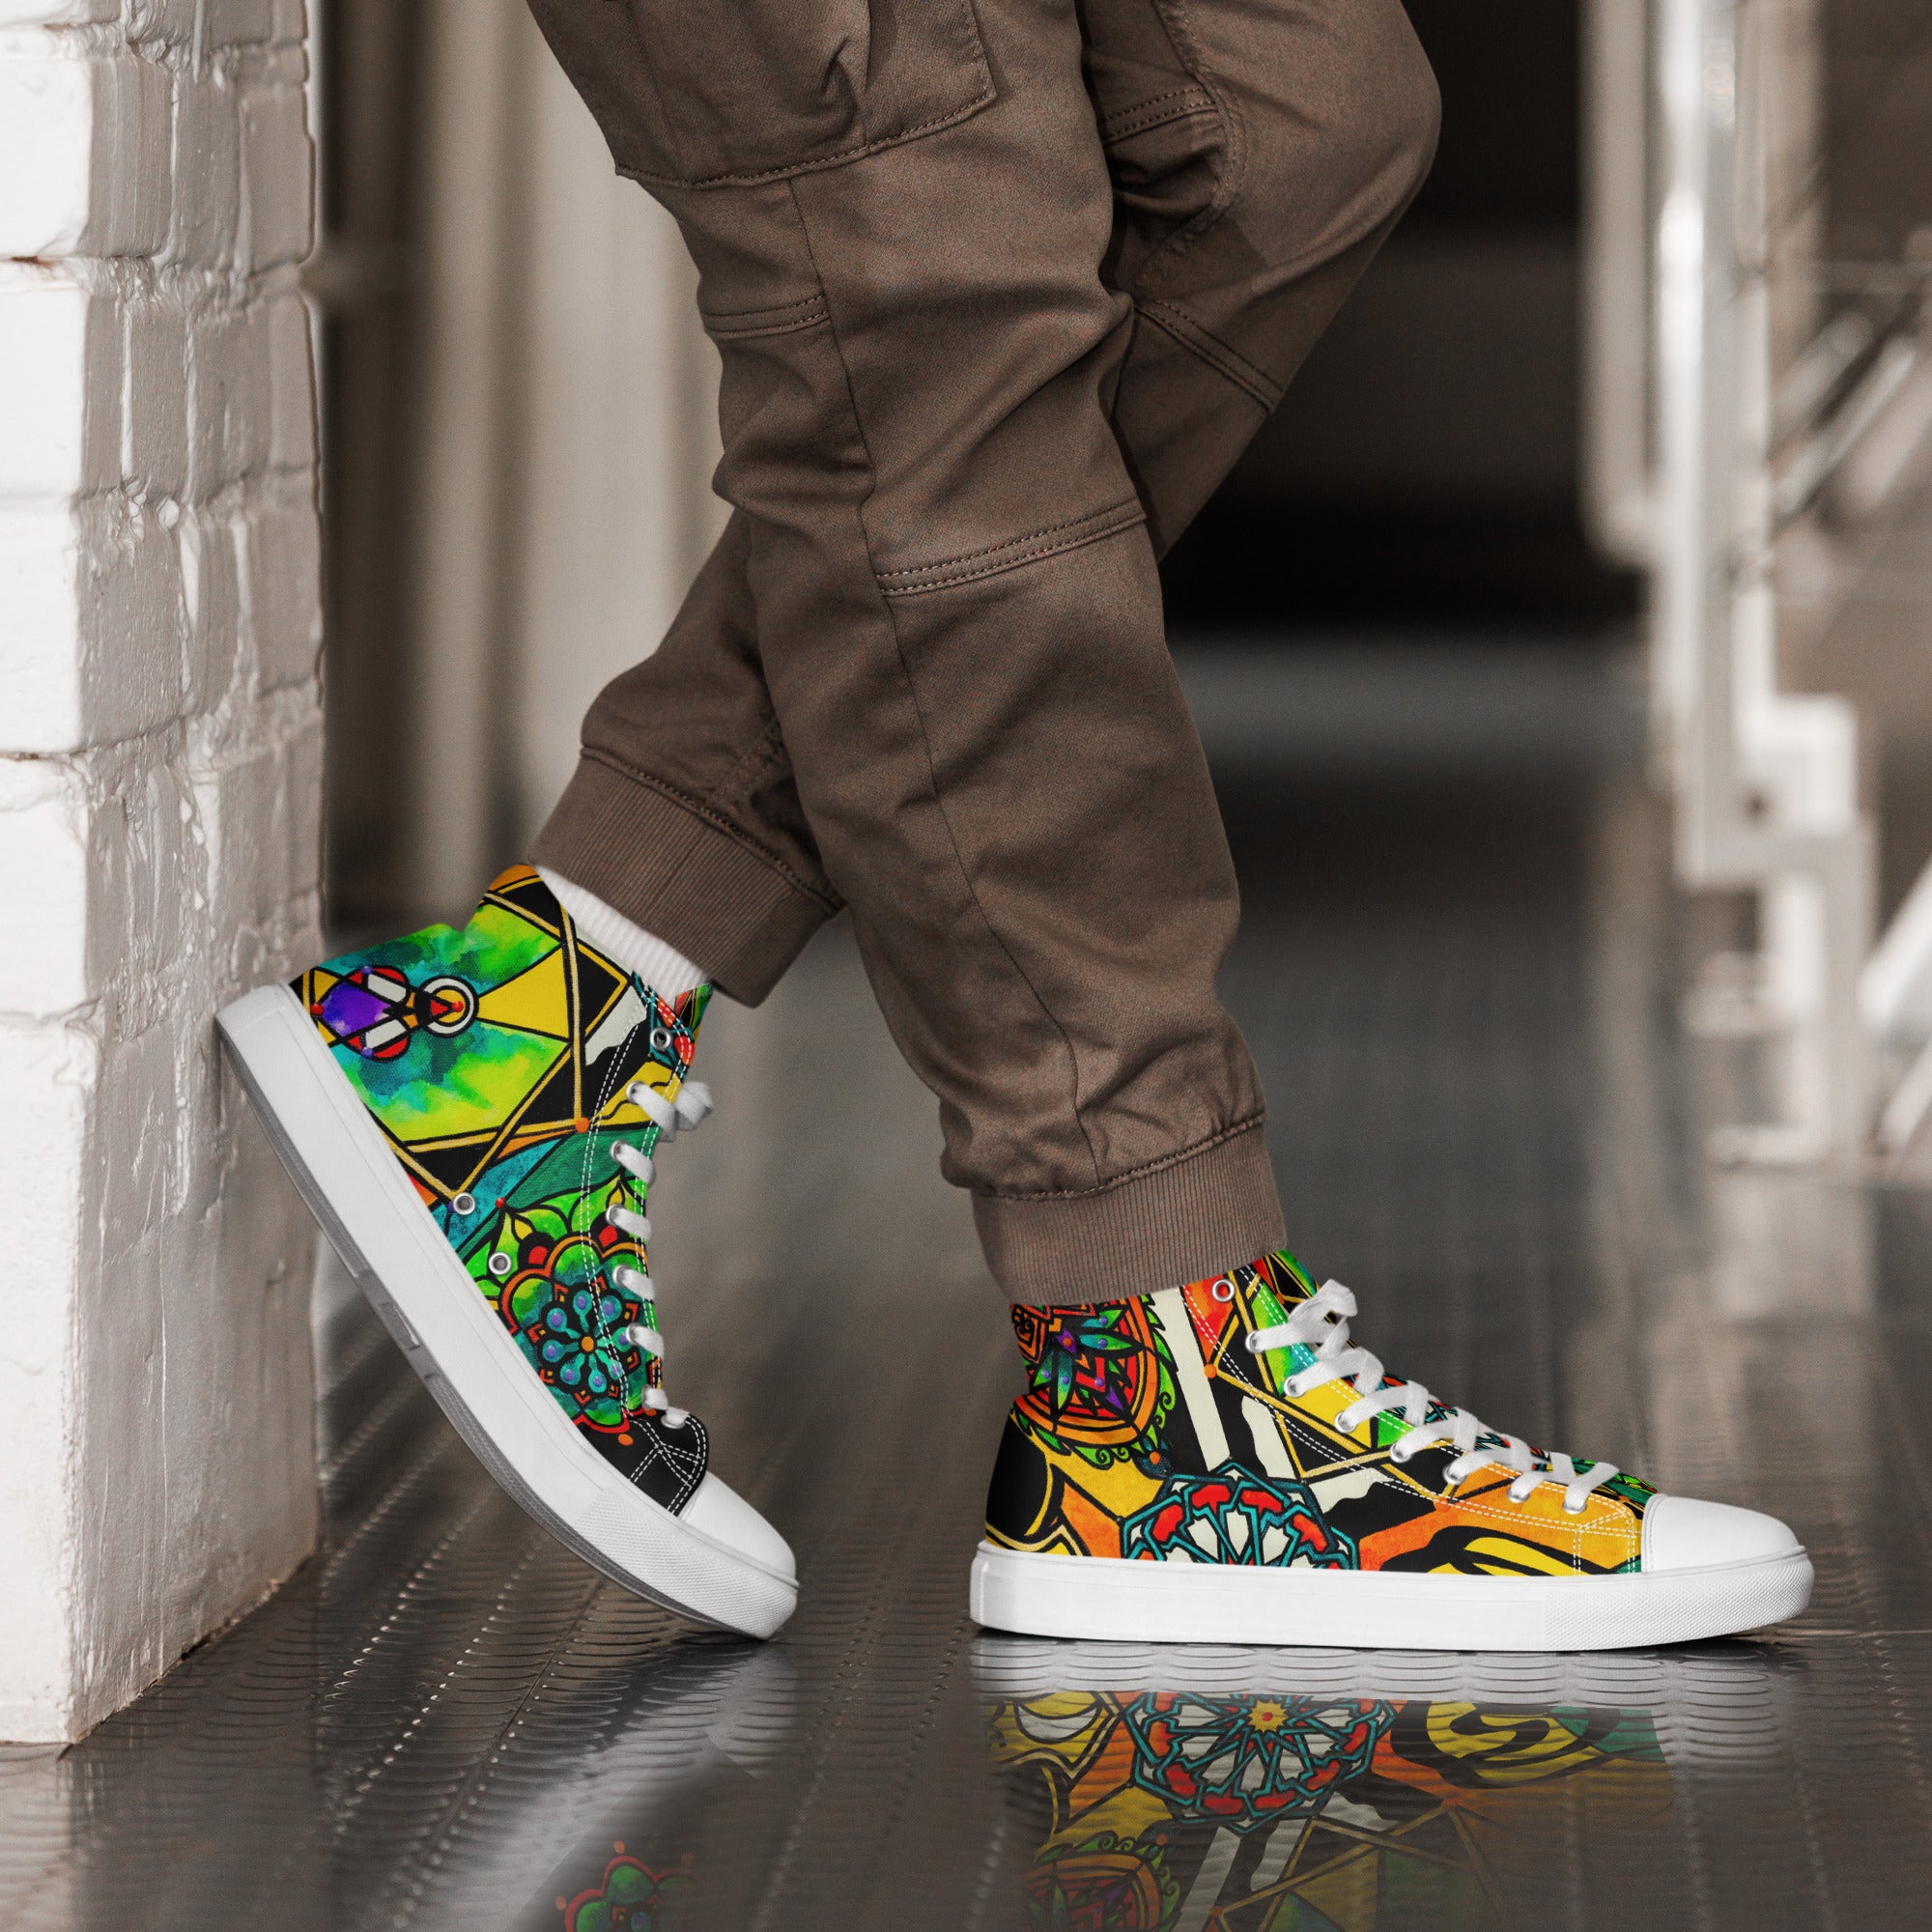 Muhammad Consciousness - Men’s high top canvas shoes